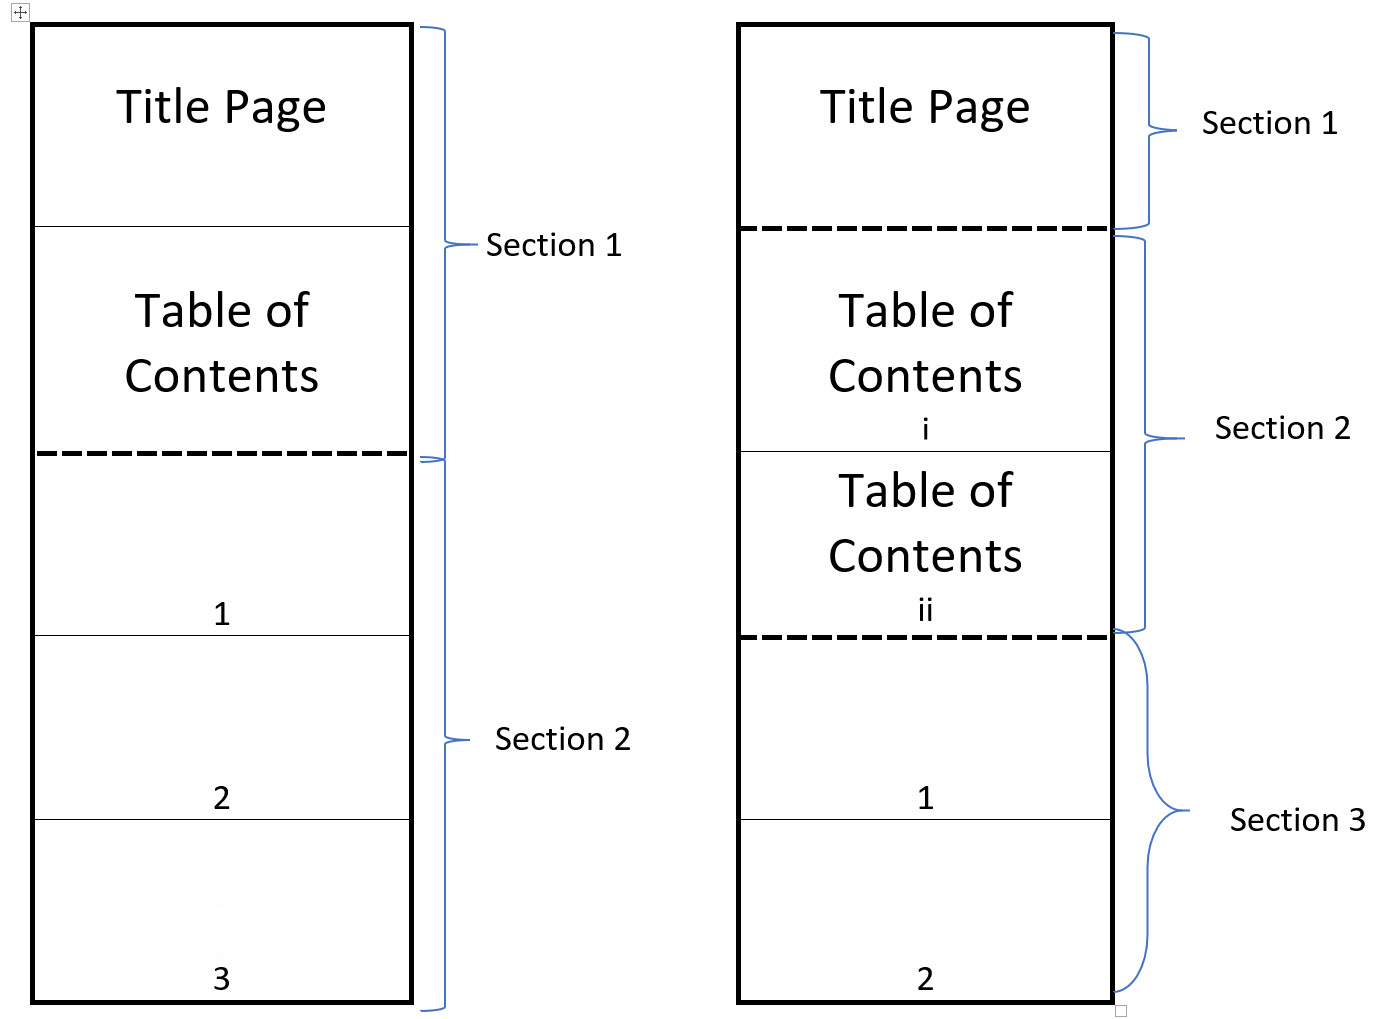 Dividing a page into sections to show how page number formats can be different in different sections